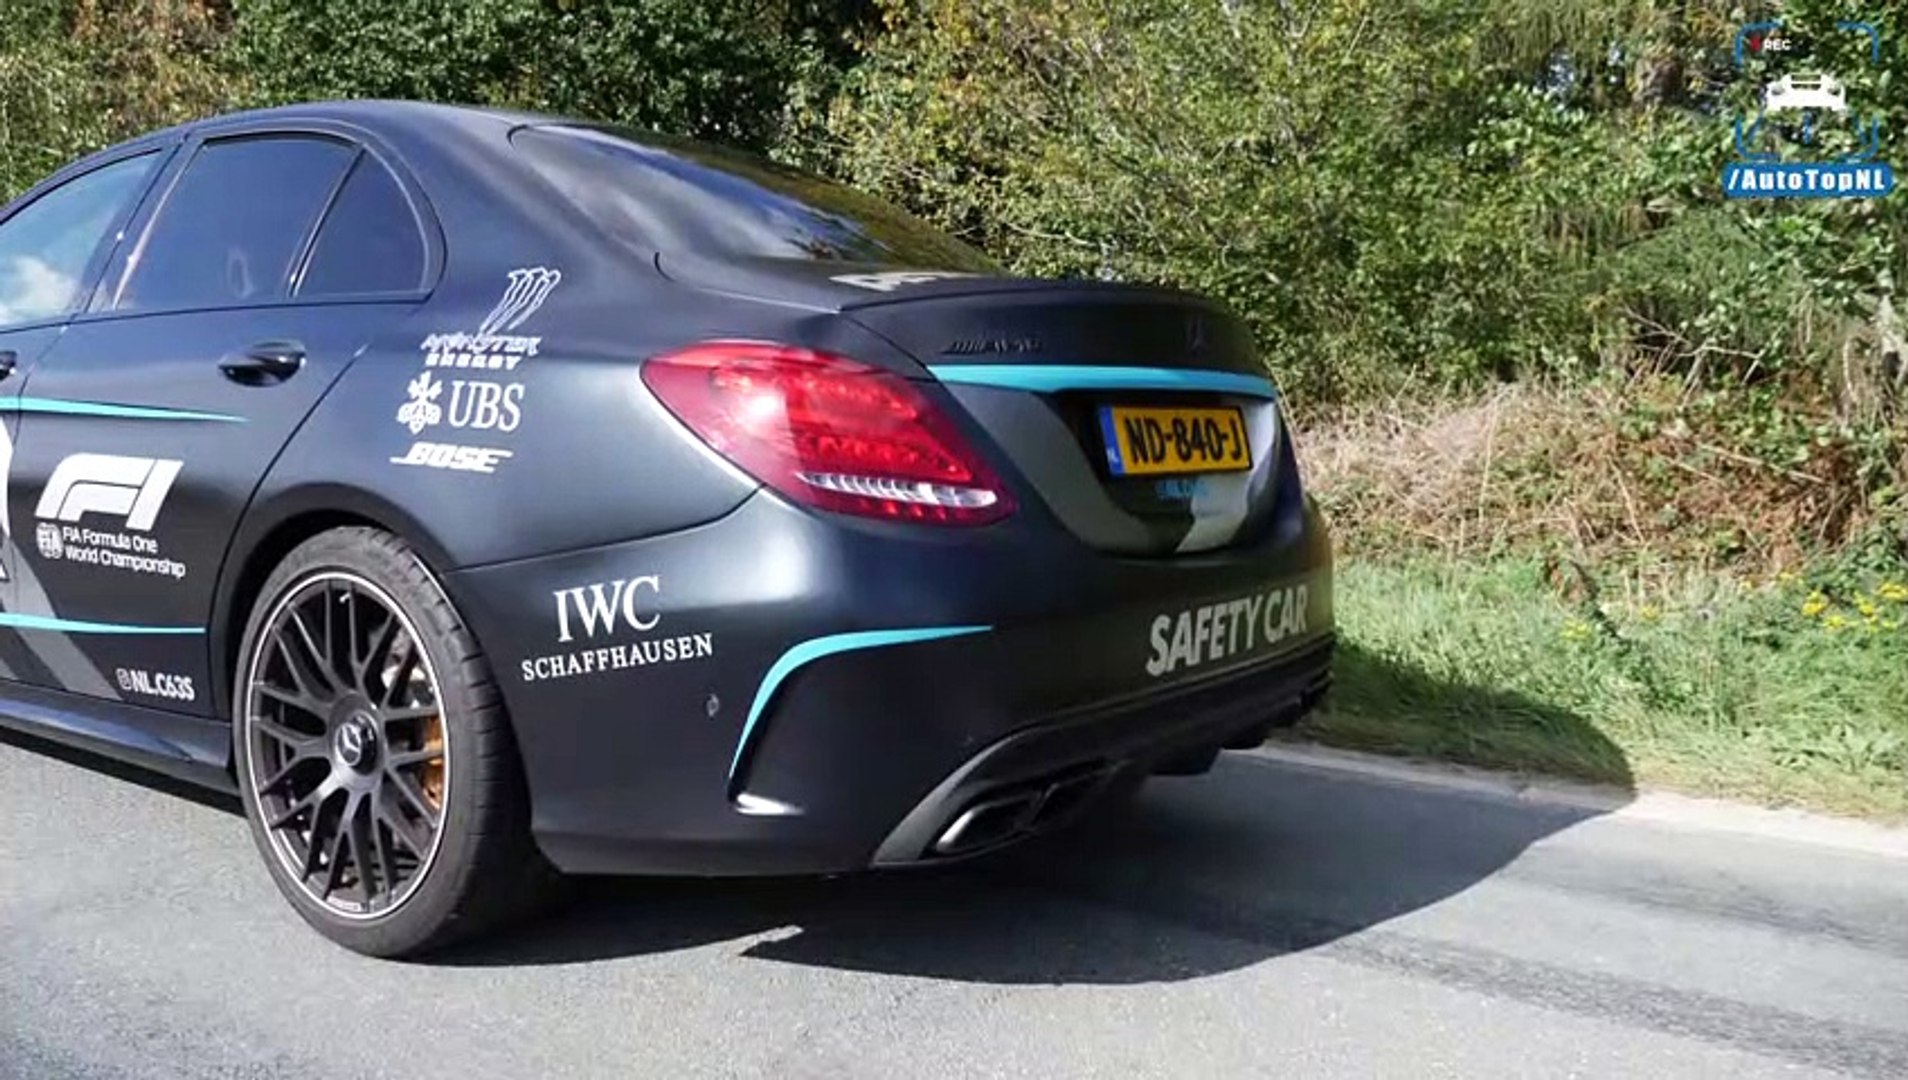 620HP C63 S AMG | F1 SAFETY CAR | INSANELY LOUD! iPE EXHAUST by AutoTopNL